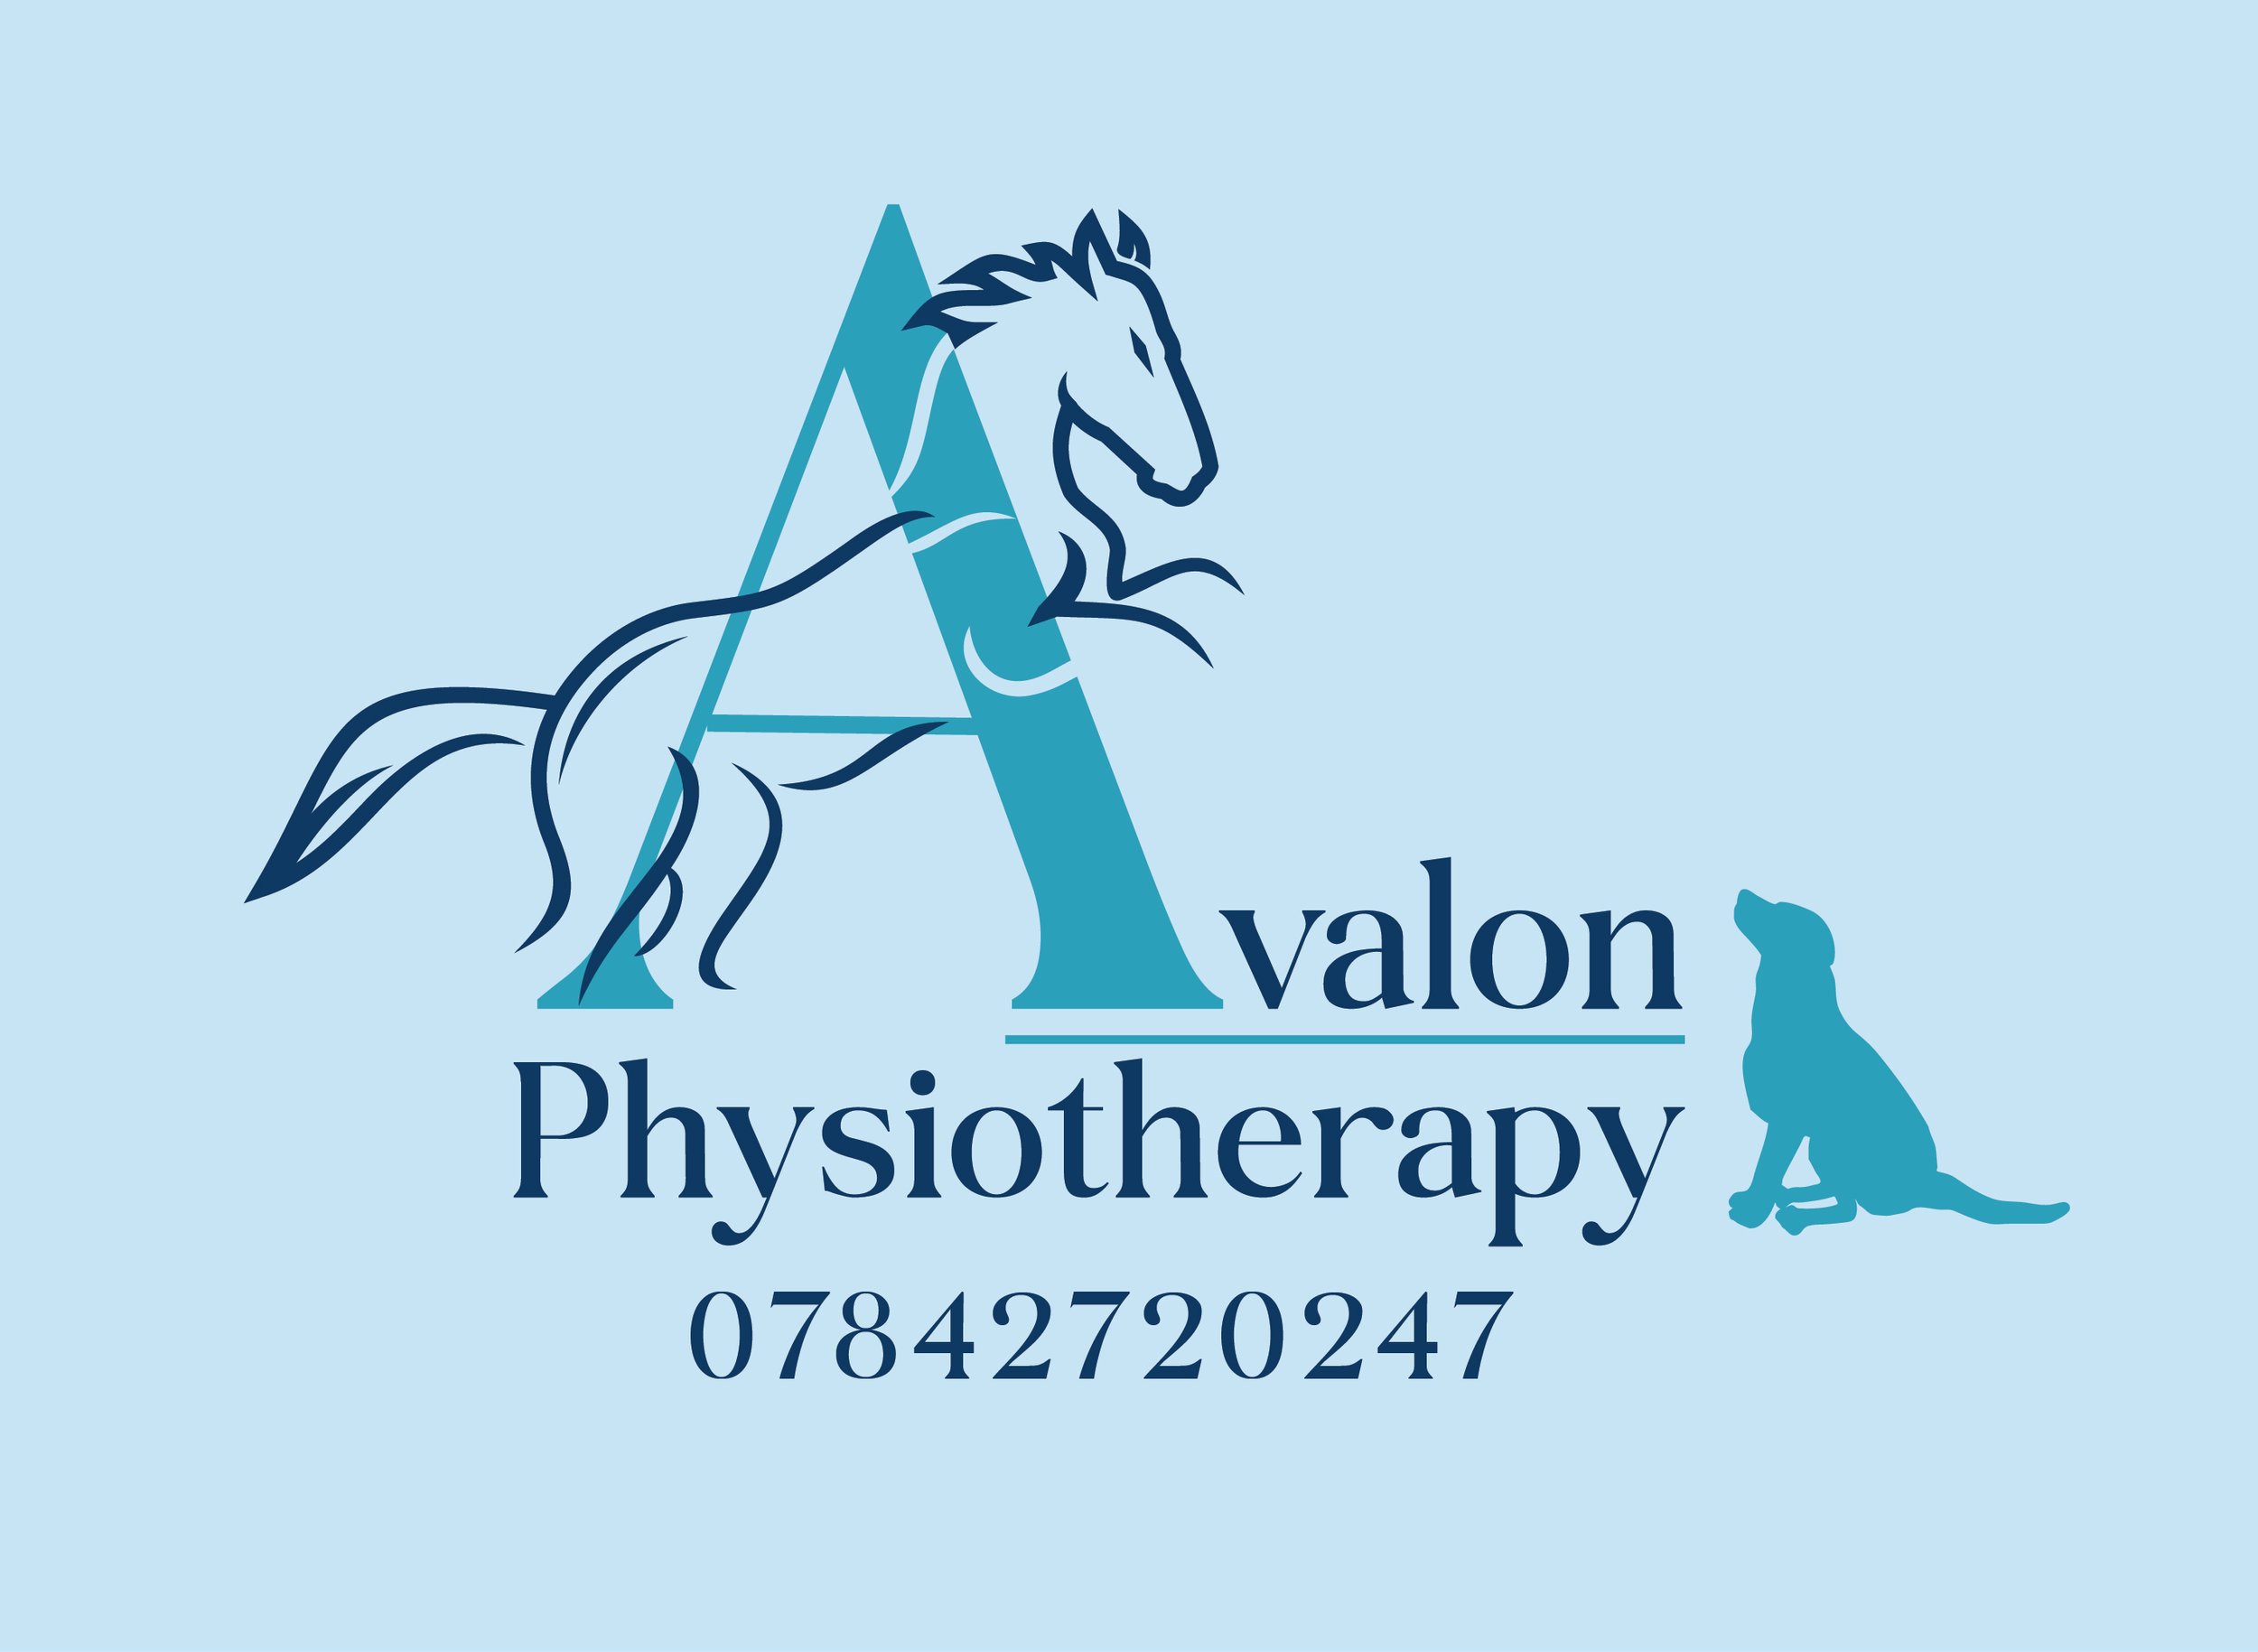 Avalon Physiotherapy Logo with Number (1) (1).jpg